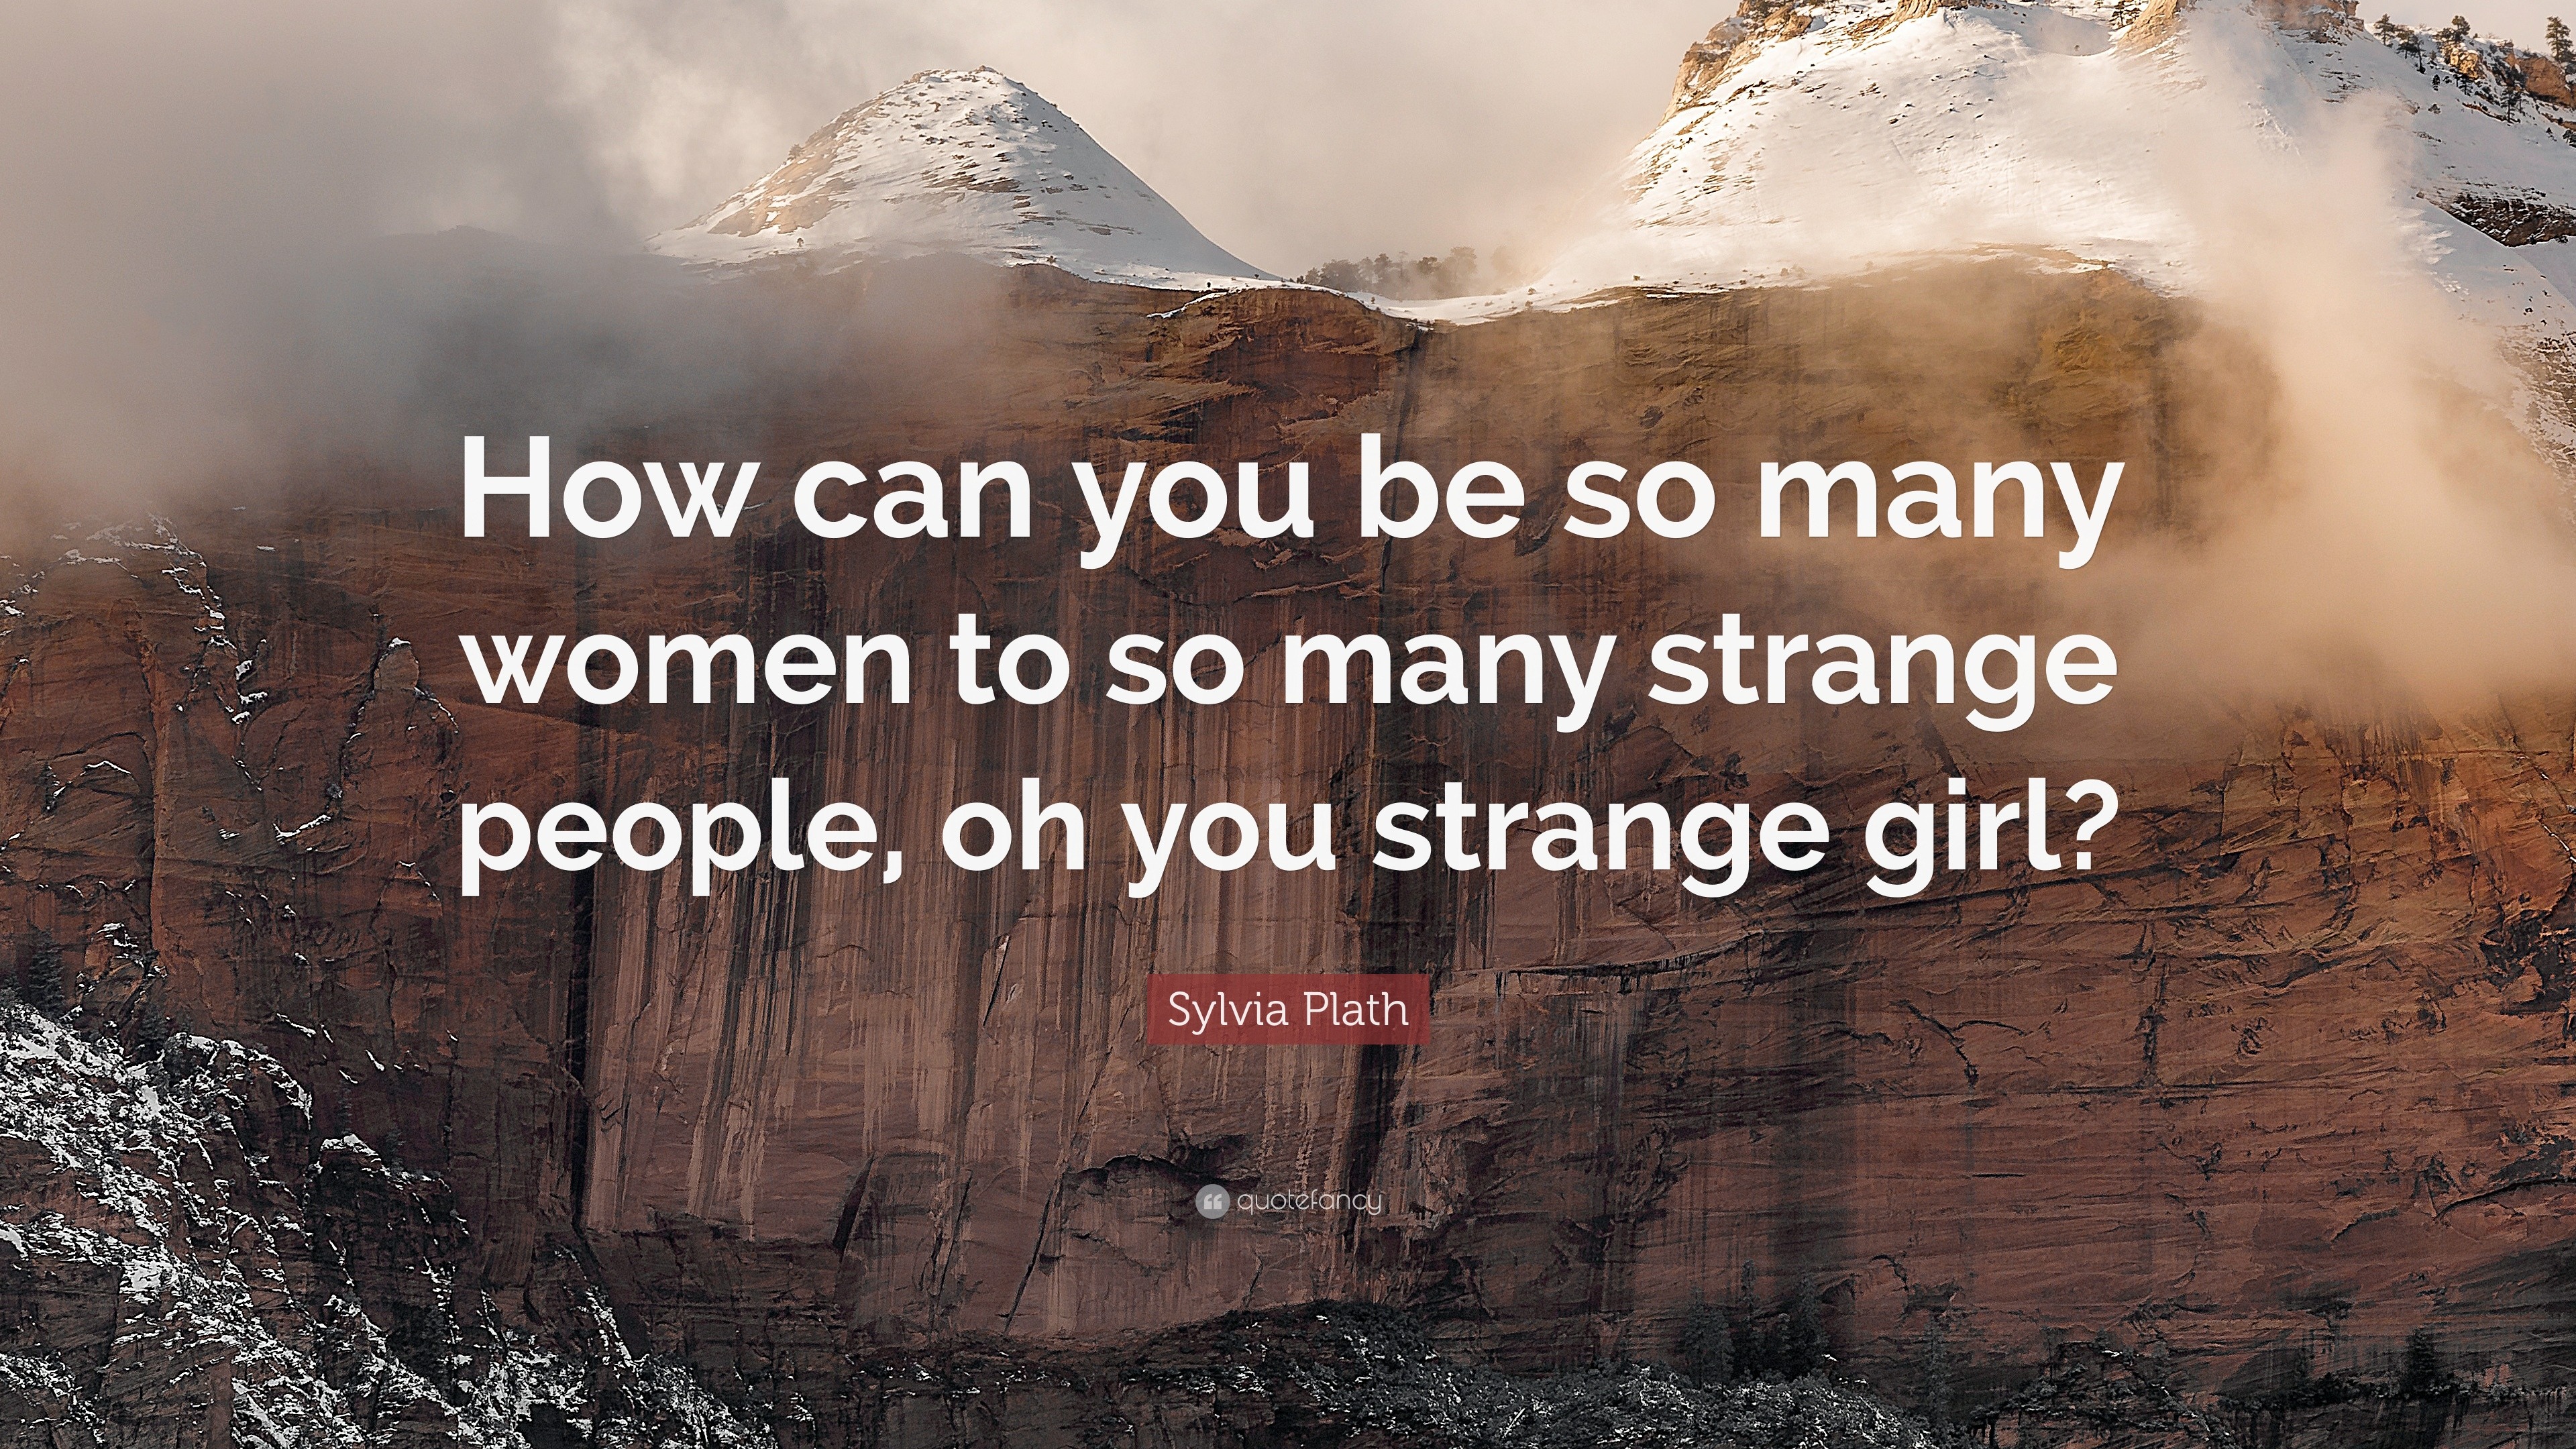 Sylvia Plath Quote: “How can you be so many women to so many strange ...